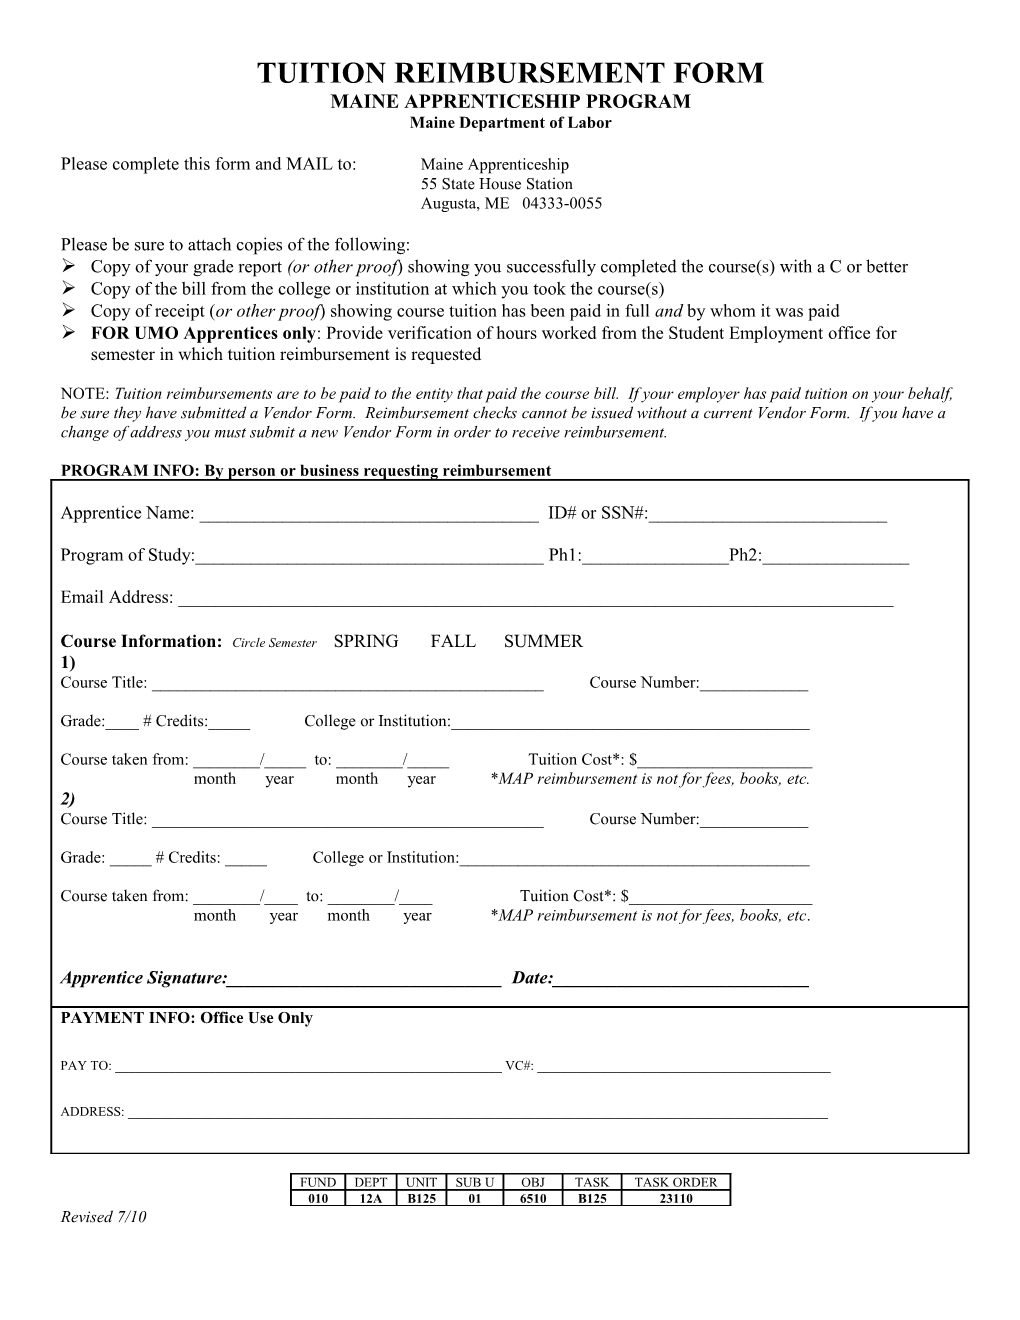 Please Complete This Form and Submit It To